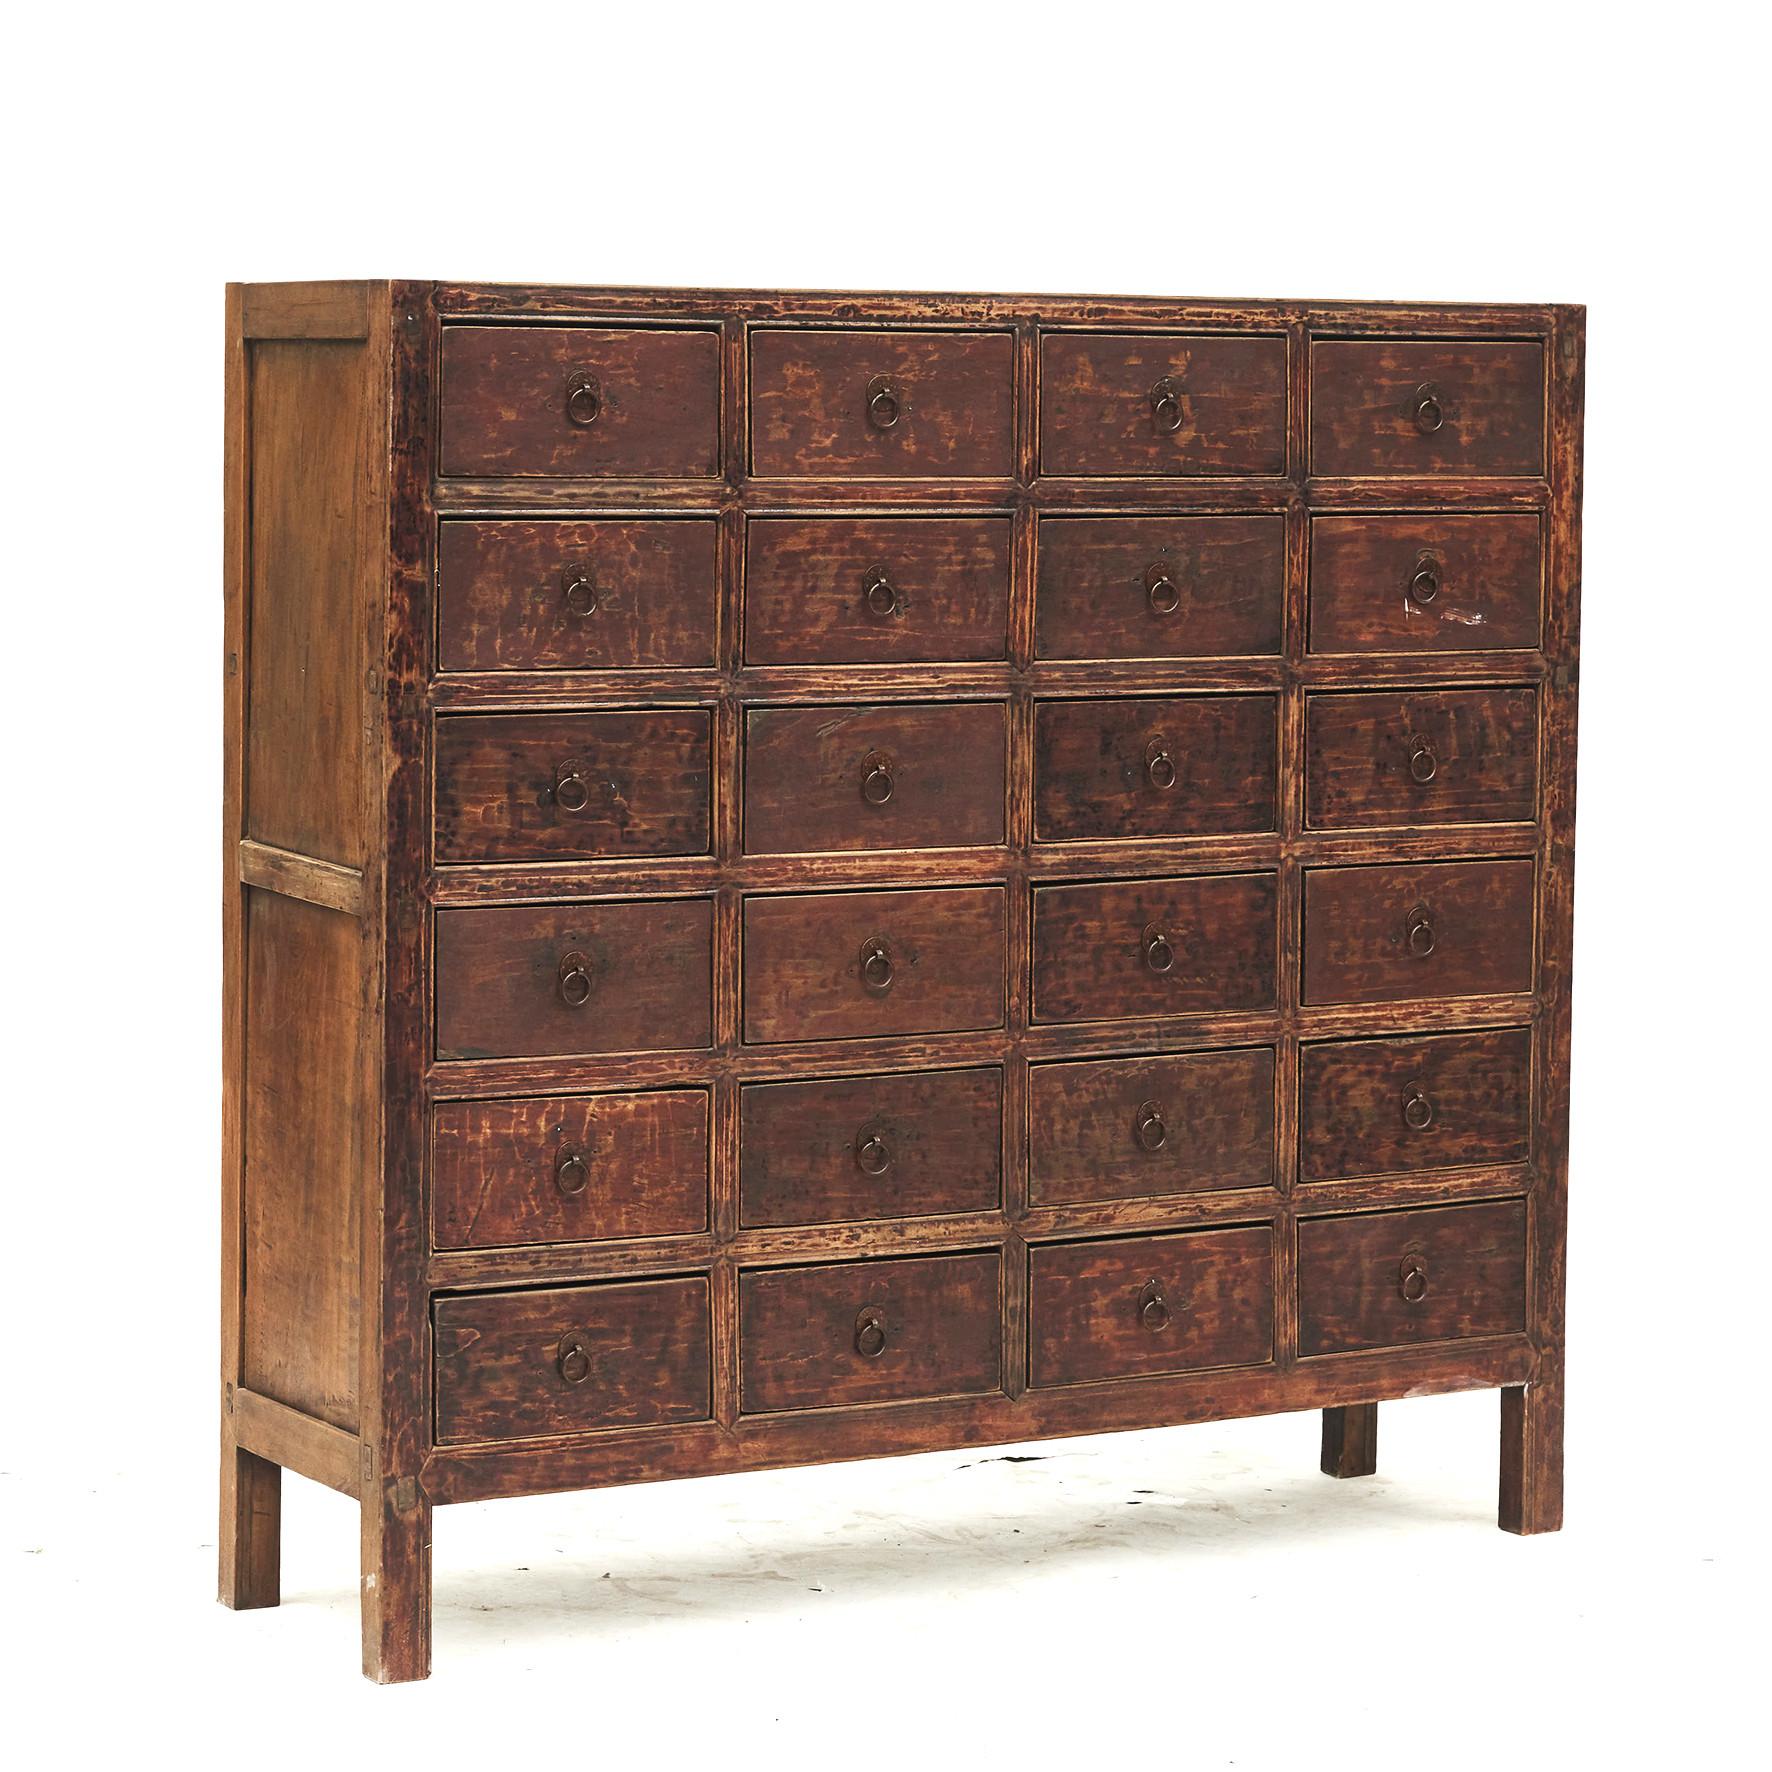 Qing 19th Century Apothecary Medicine Chest with 24 Drawers